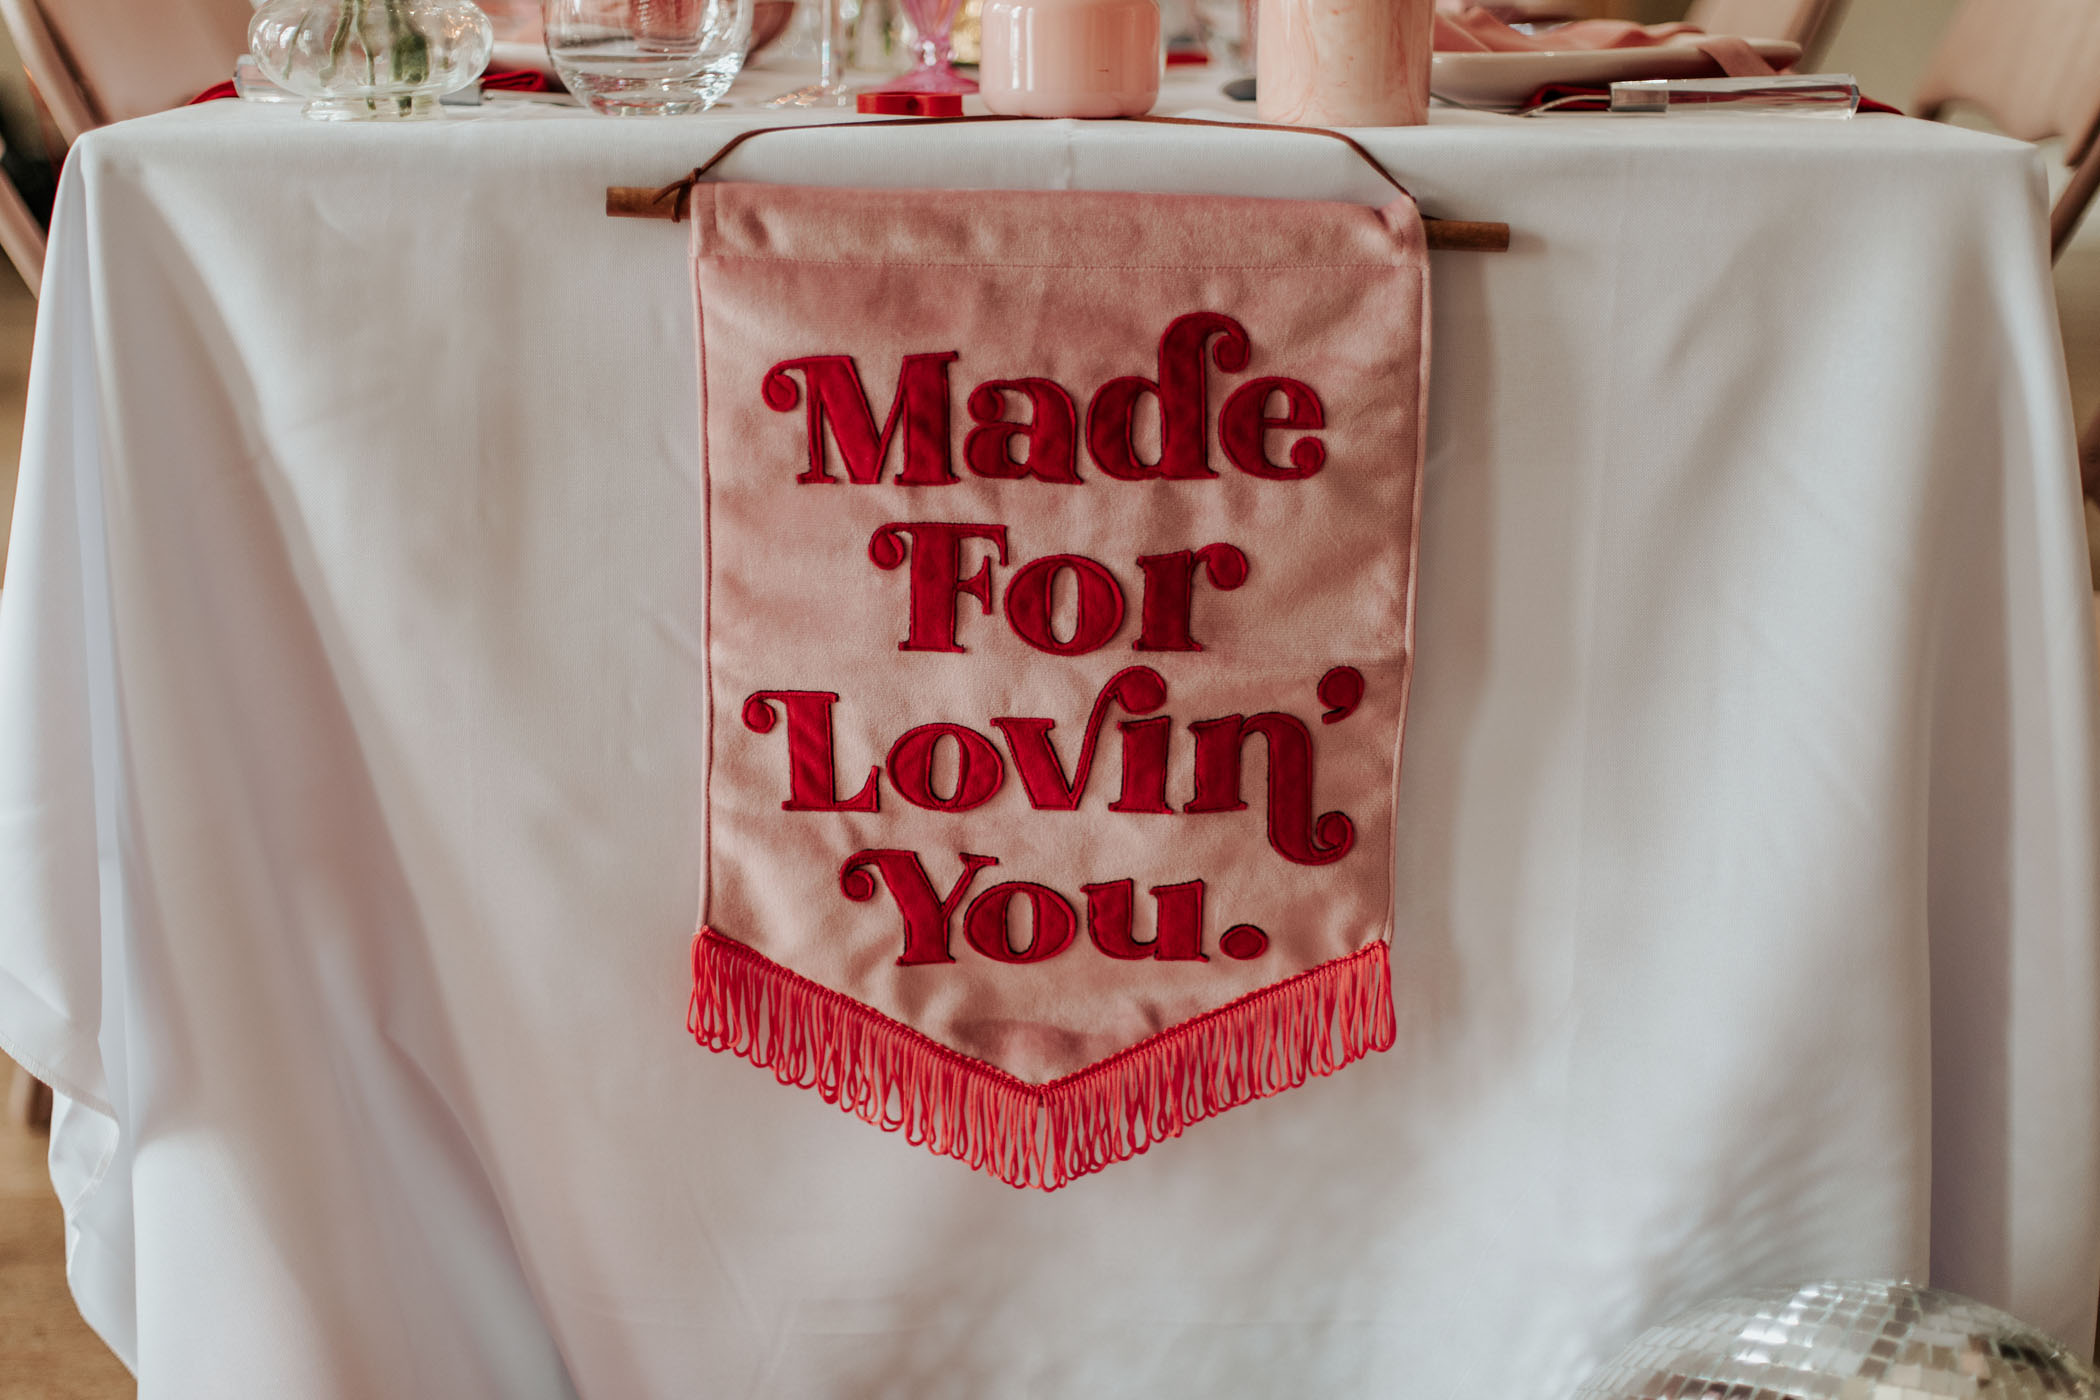 "Made for lovin' you" embroidered banner